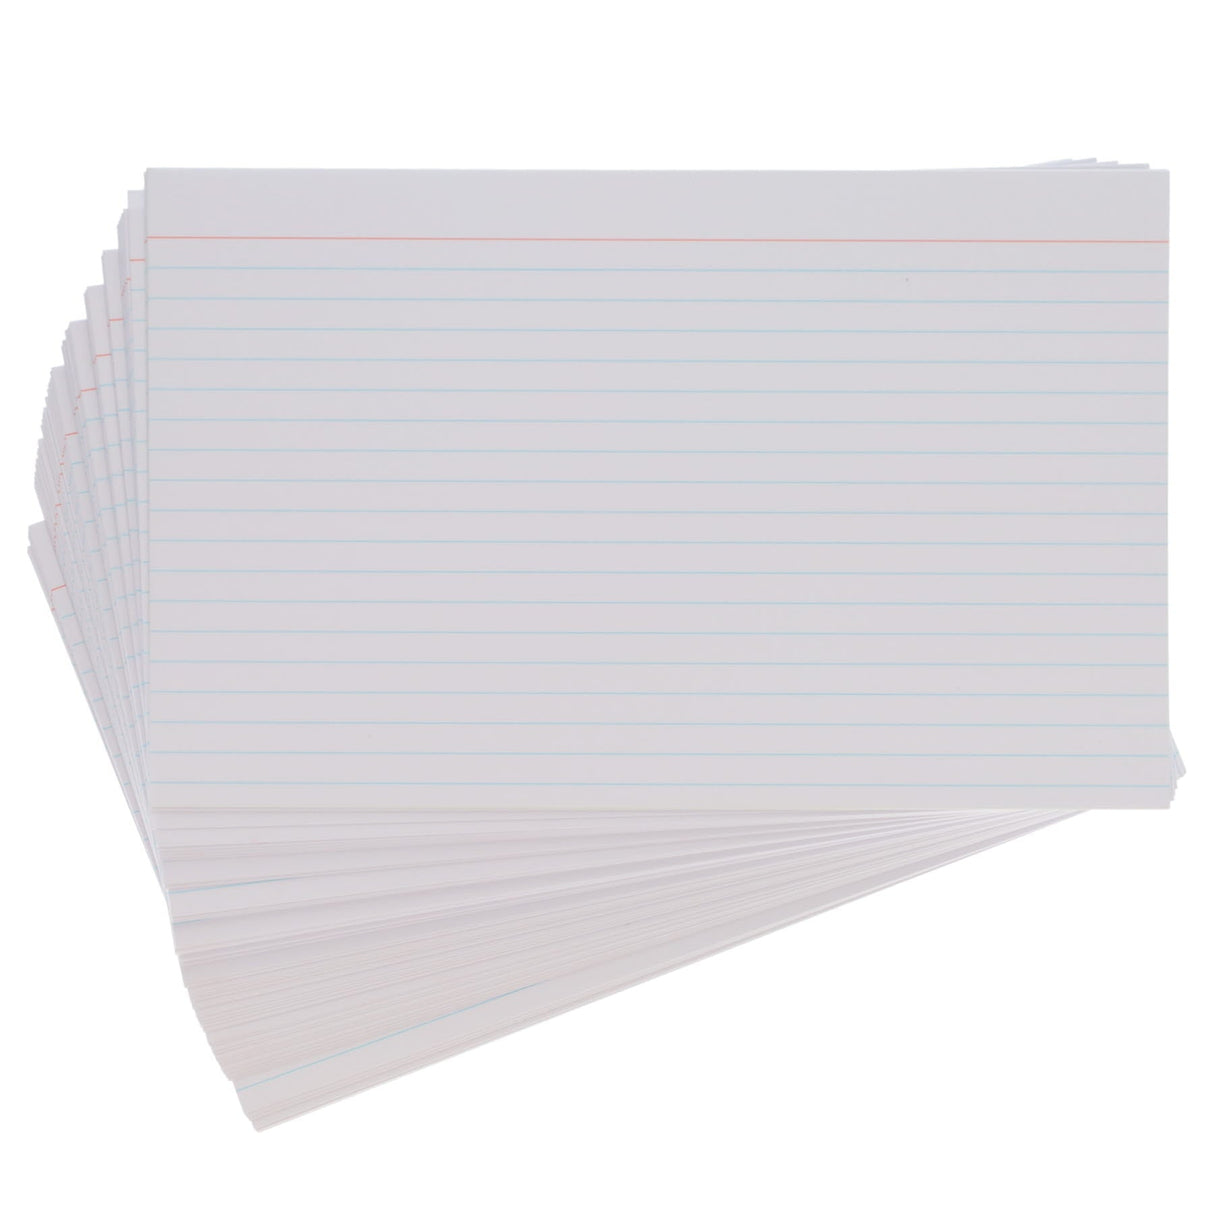 Concept 8 x 5 Ruled Record Cards - White - Pack of 100-Index Cards & Boxes-Concept|StationeryShop.co.uk